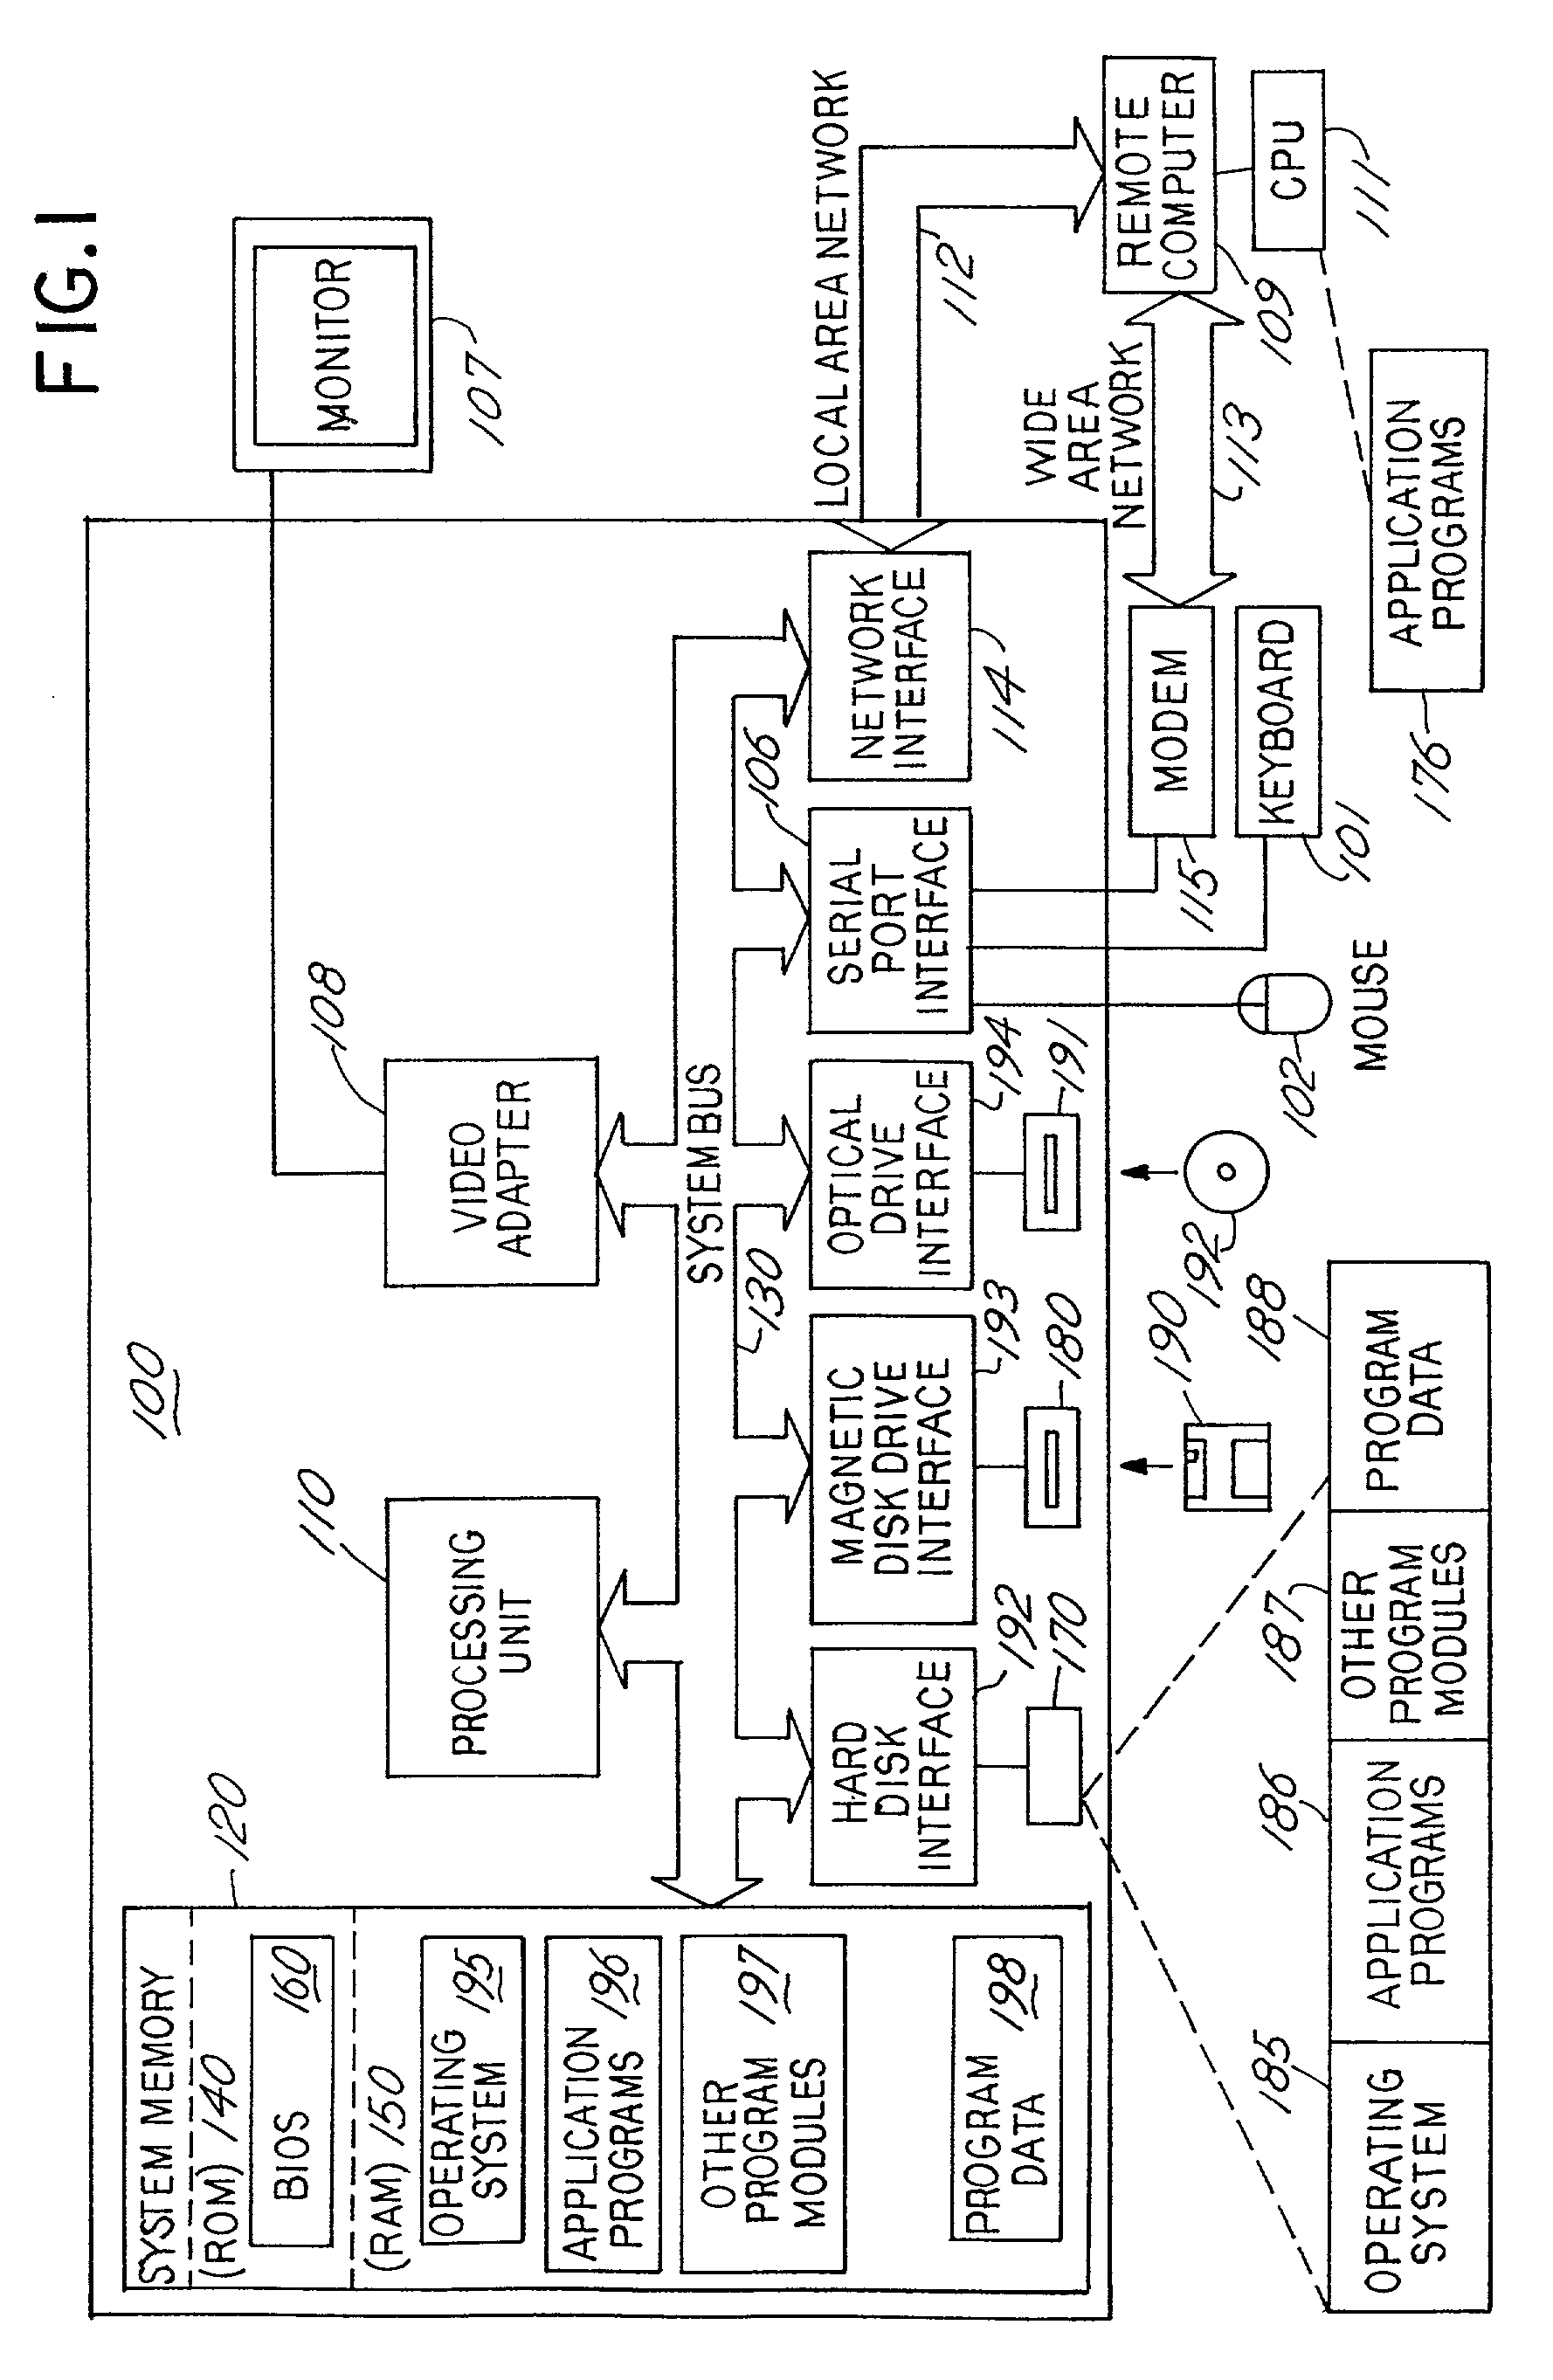 Displaying graphical information and user selected properties on a computer interface